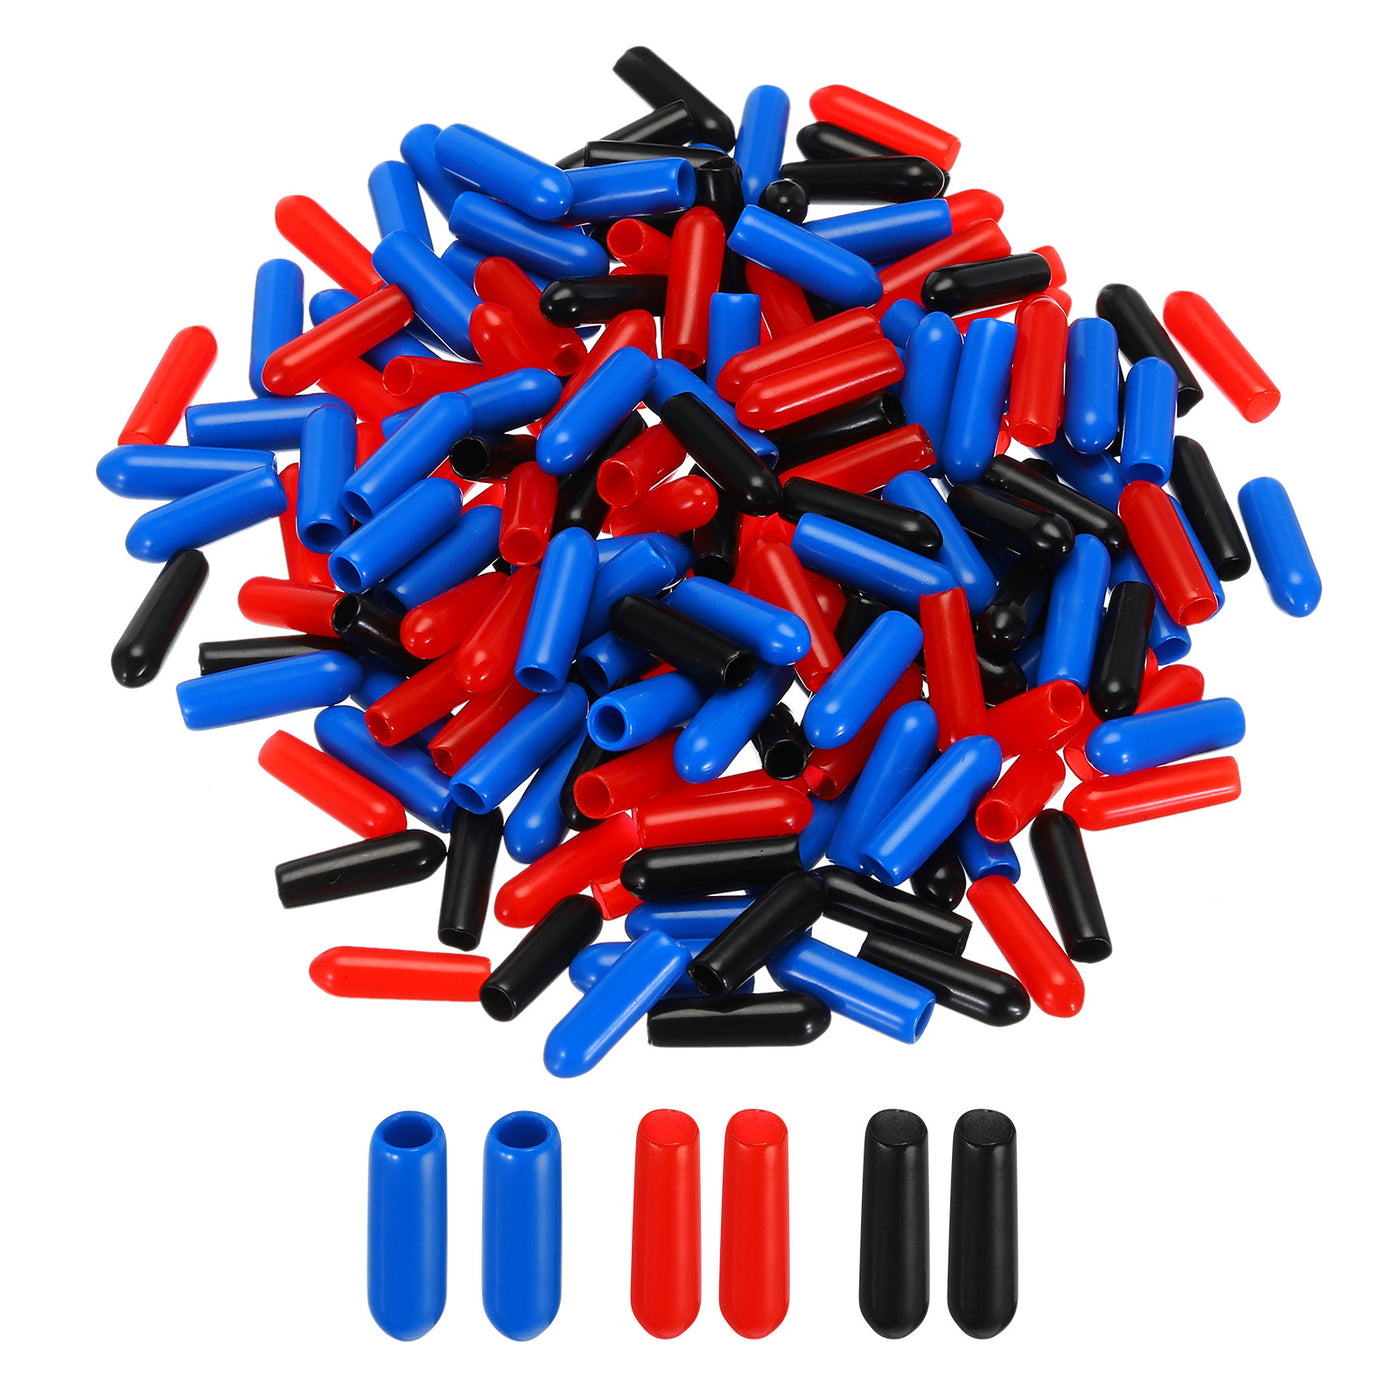 uxcell Uxcell 90pcs Rubber End Caps 3.5mm(1/8") ID Vinyl PVC Round Tube Bolt Cap Cover Screw Thread Protectors, Black Red Blue